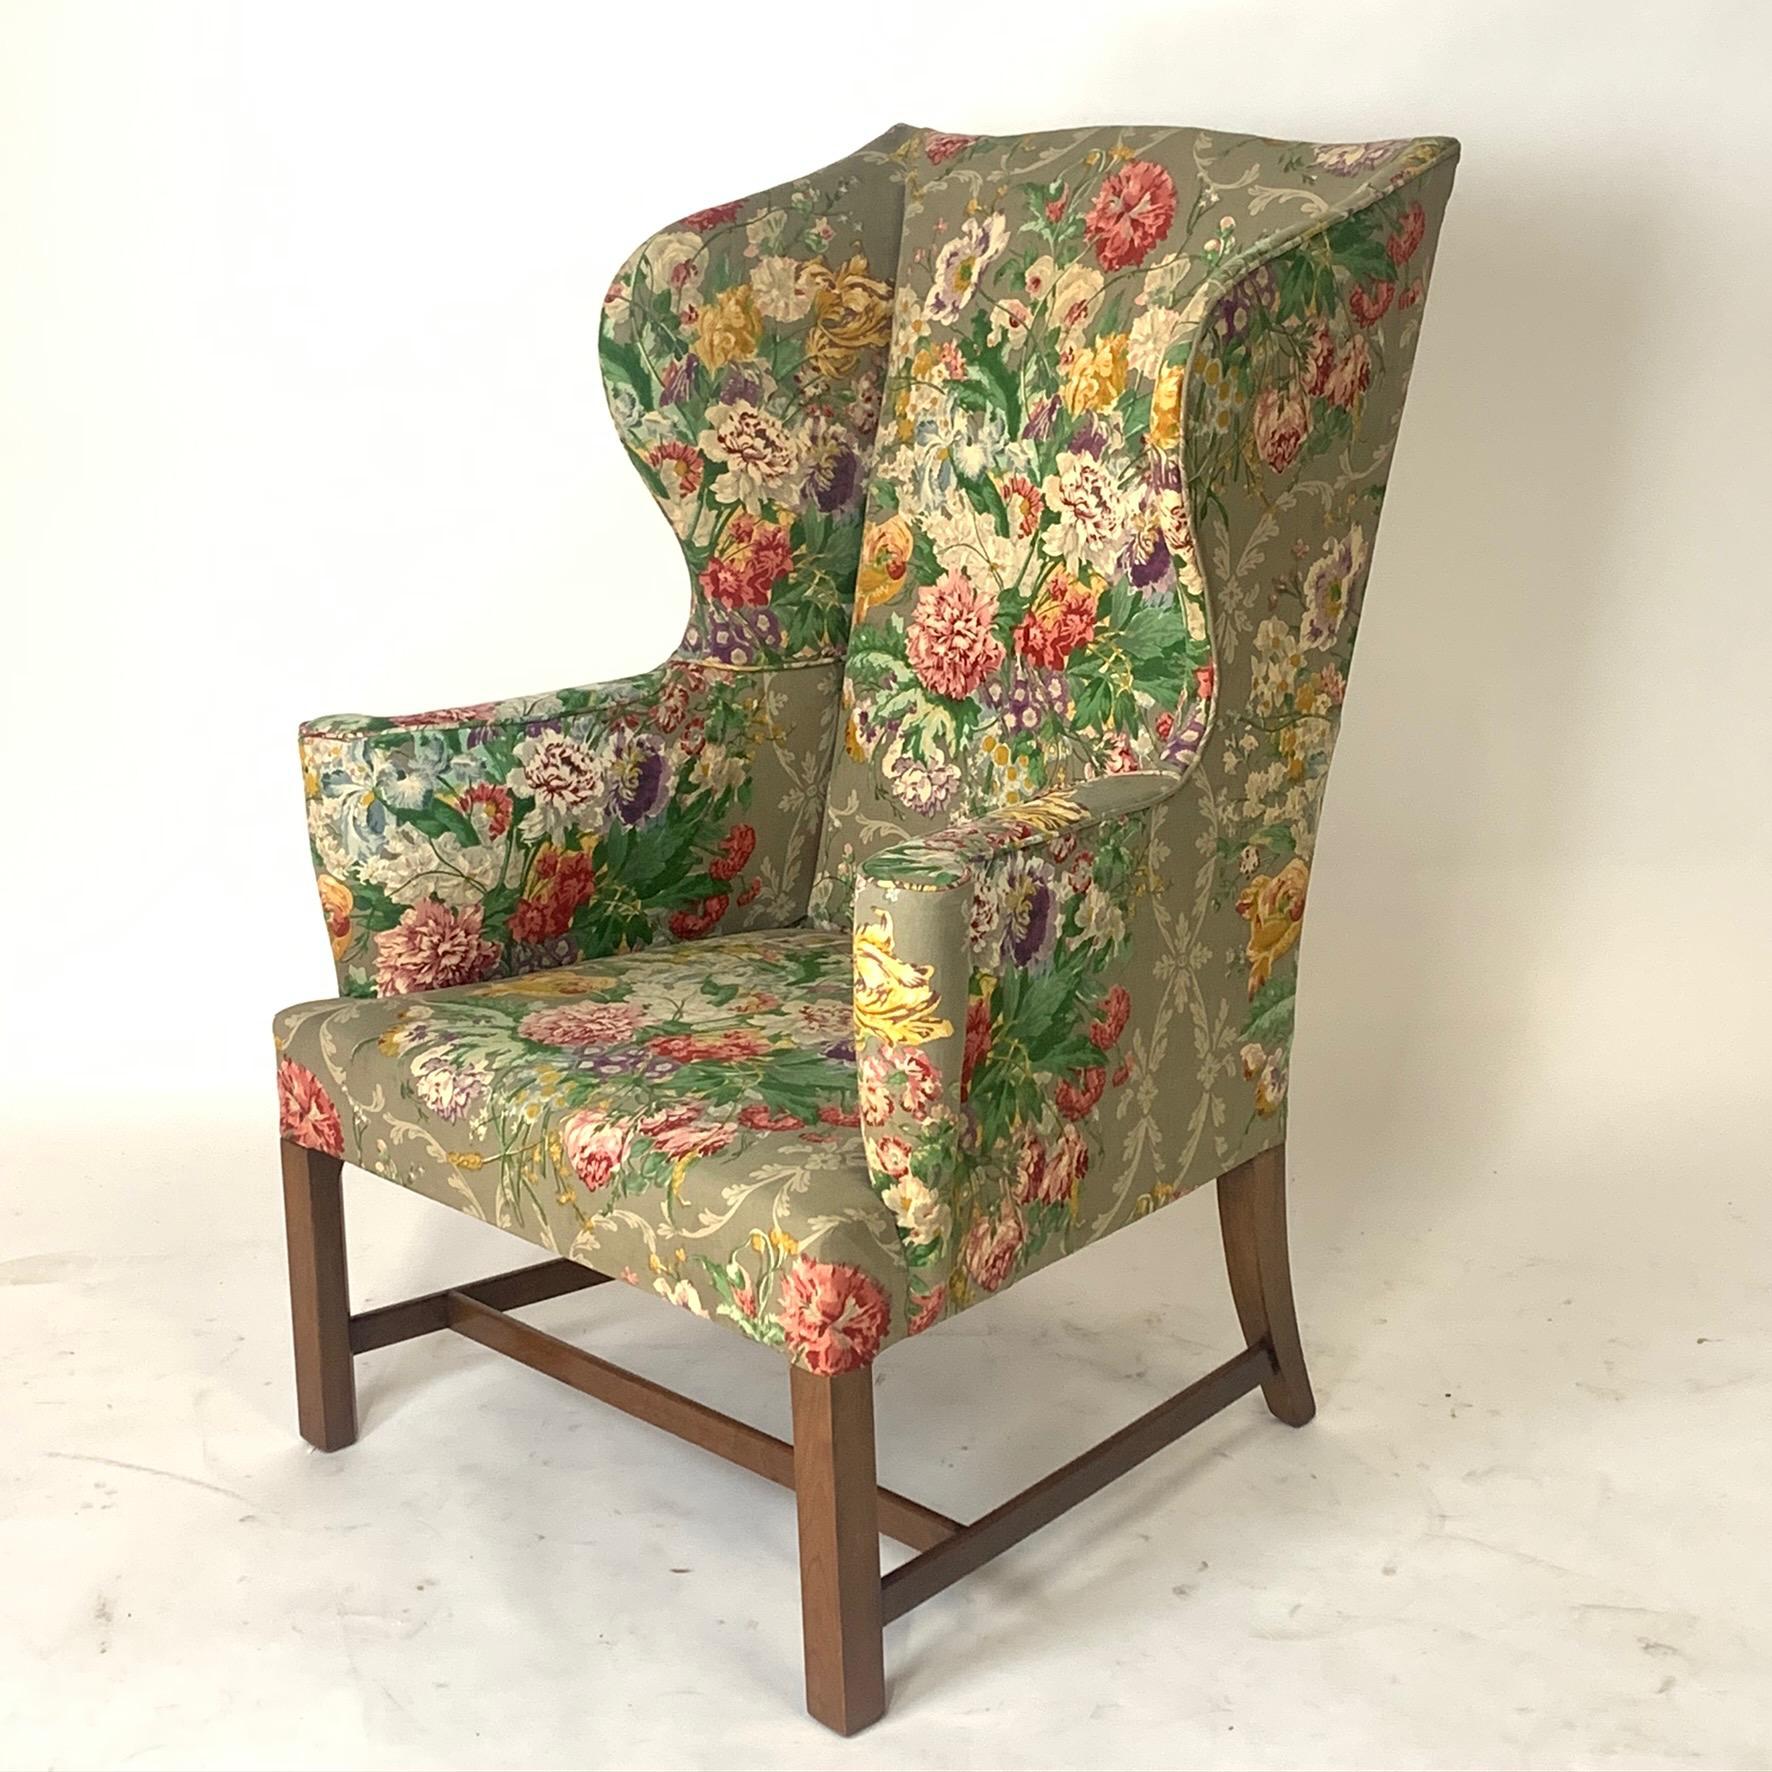 Exceptional Early American Wingback Chairs with Stunning Floral Upholstery 2